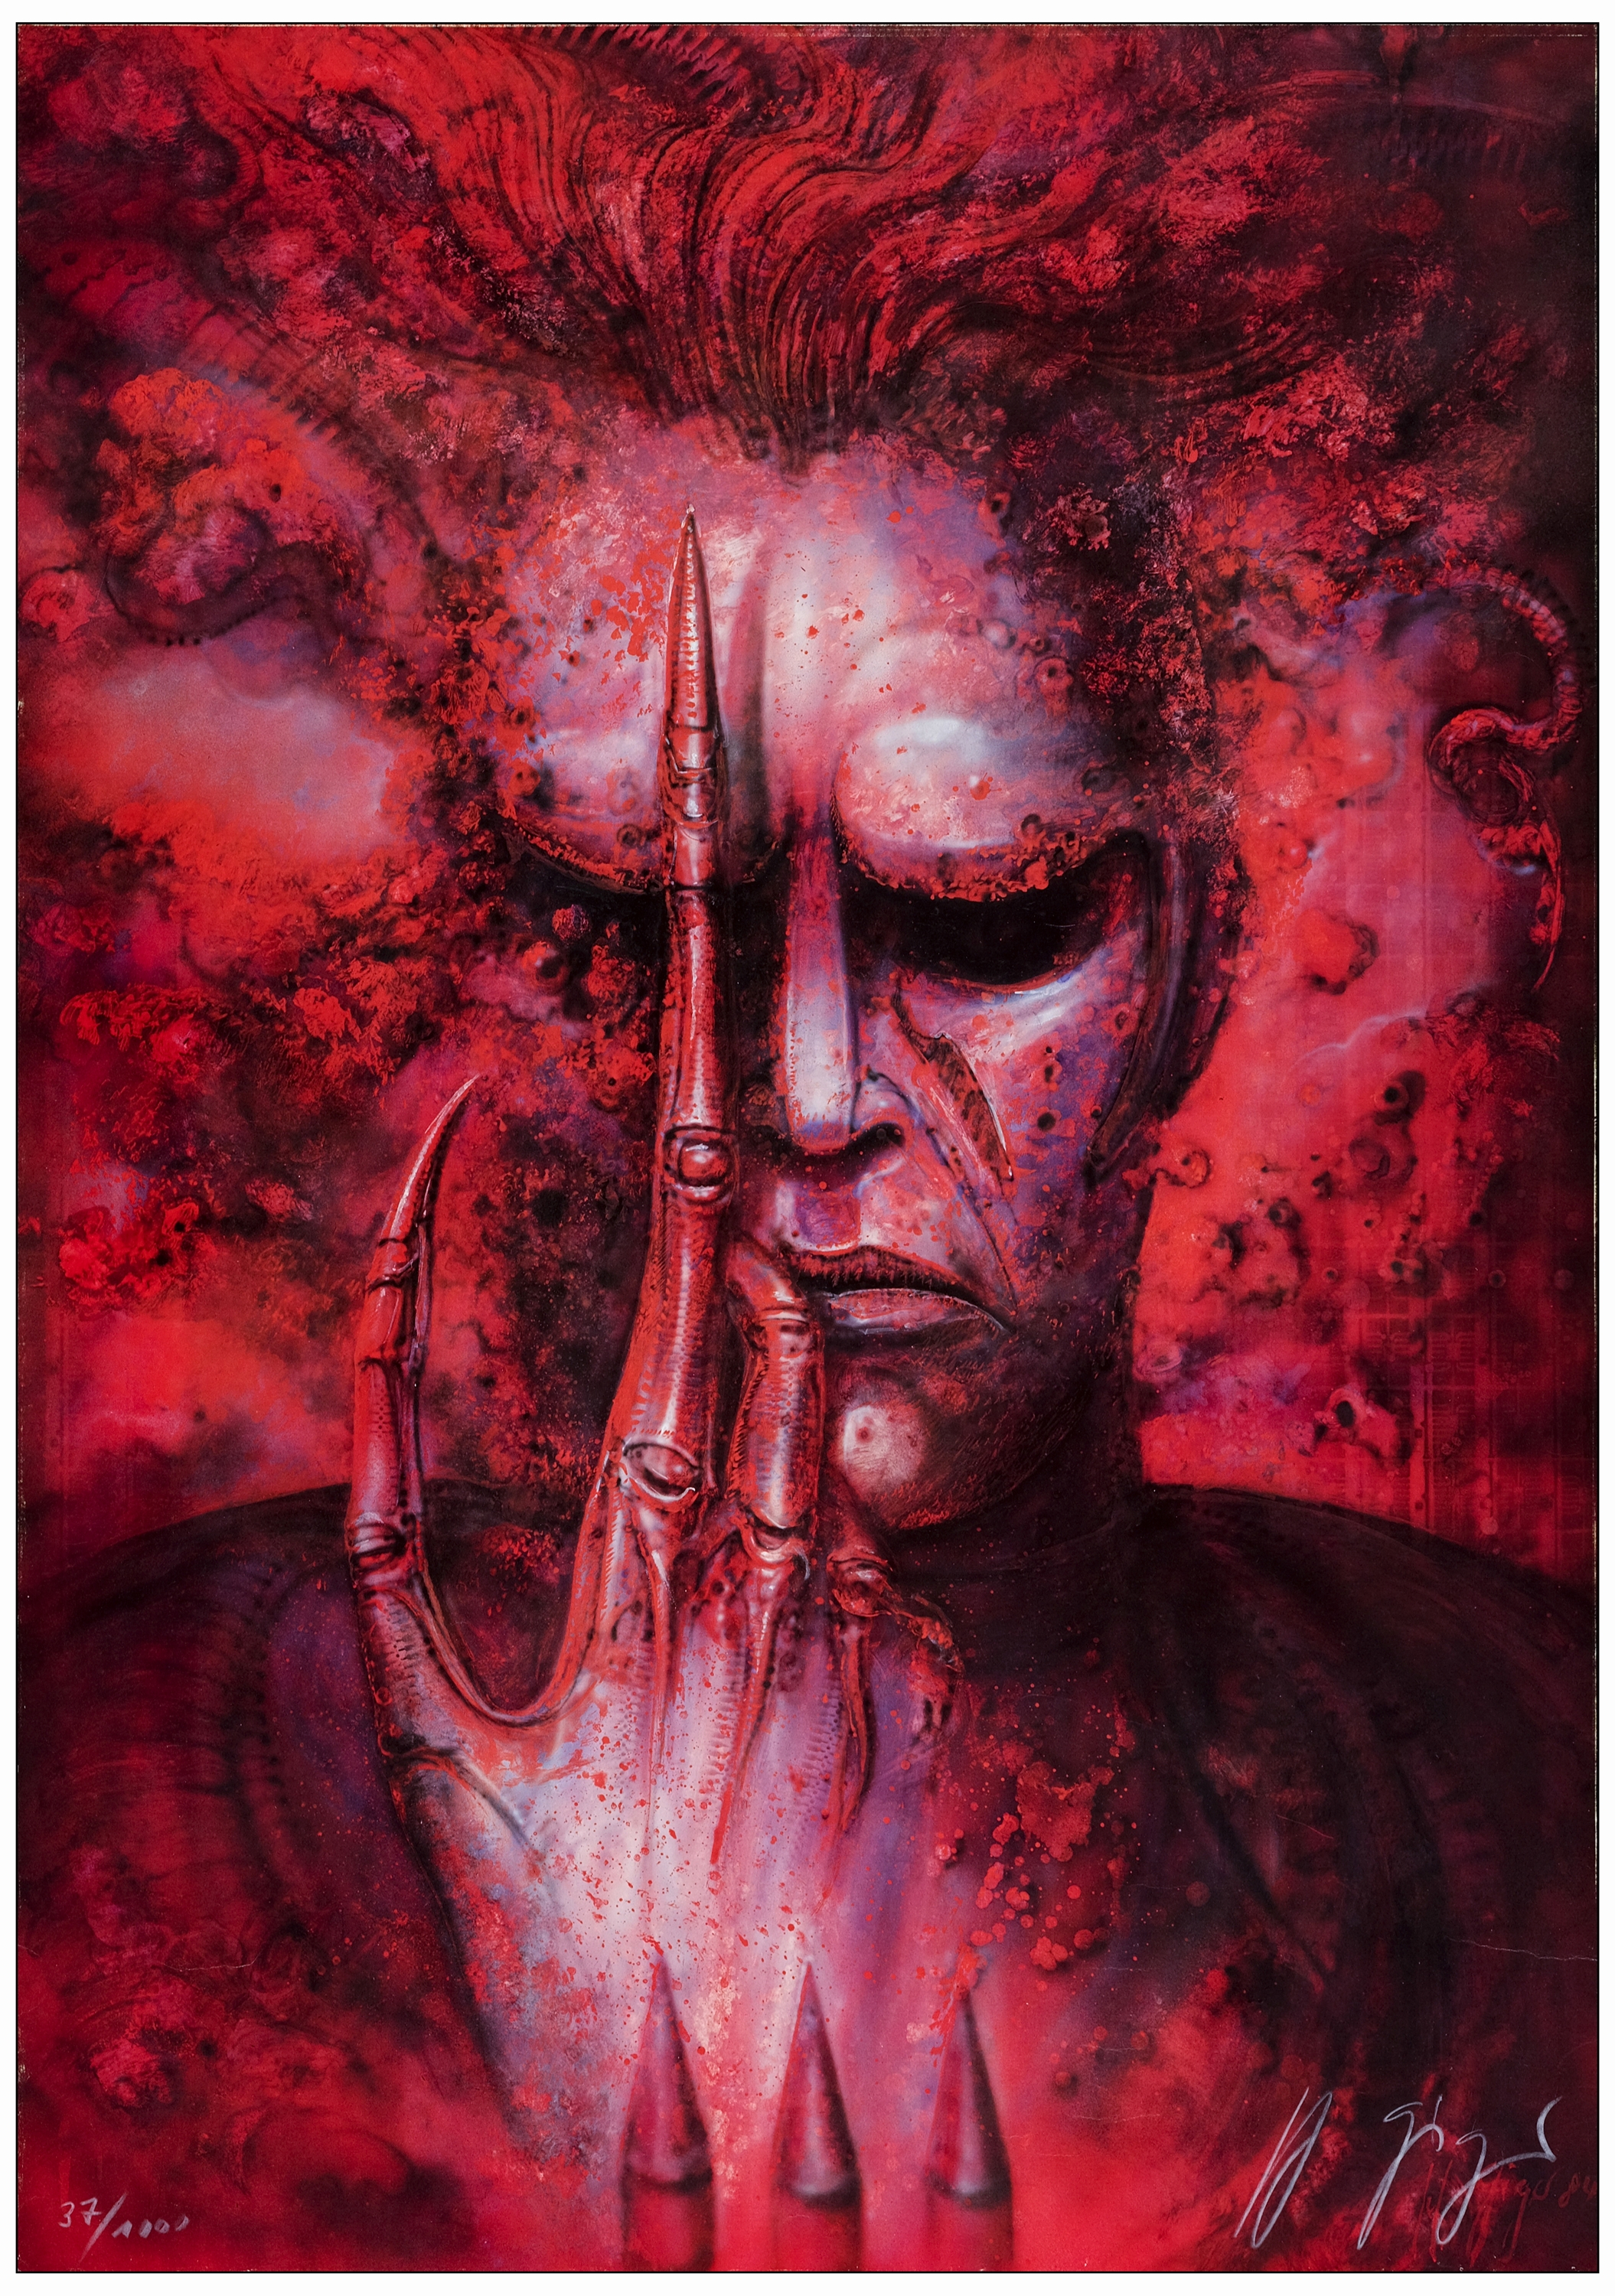 FUTURE-KILL - Signed Lithograph (26" x 37") Signed by HR Geiger and numbered; Red Style, 37/1000; Ve